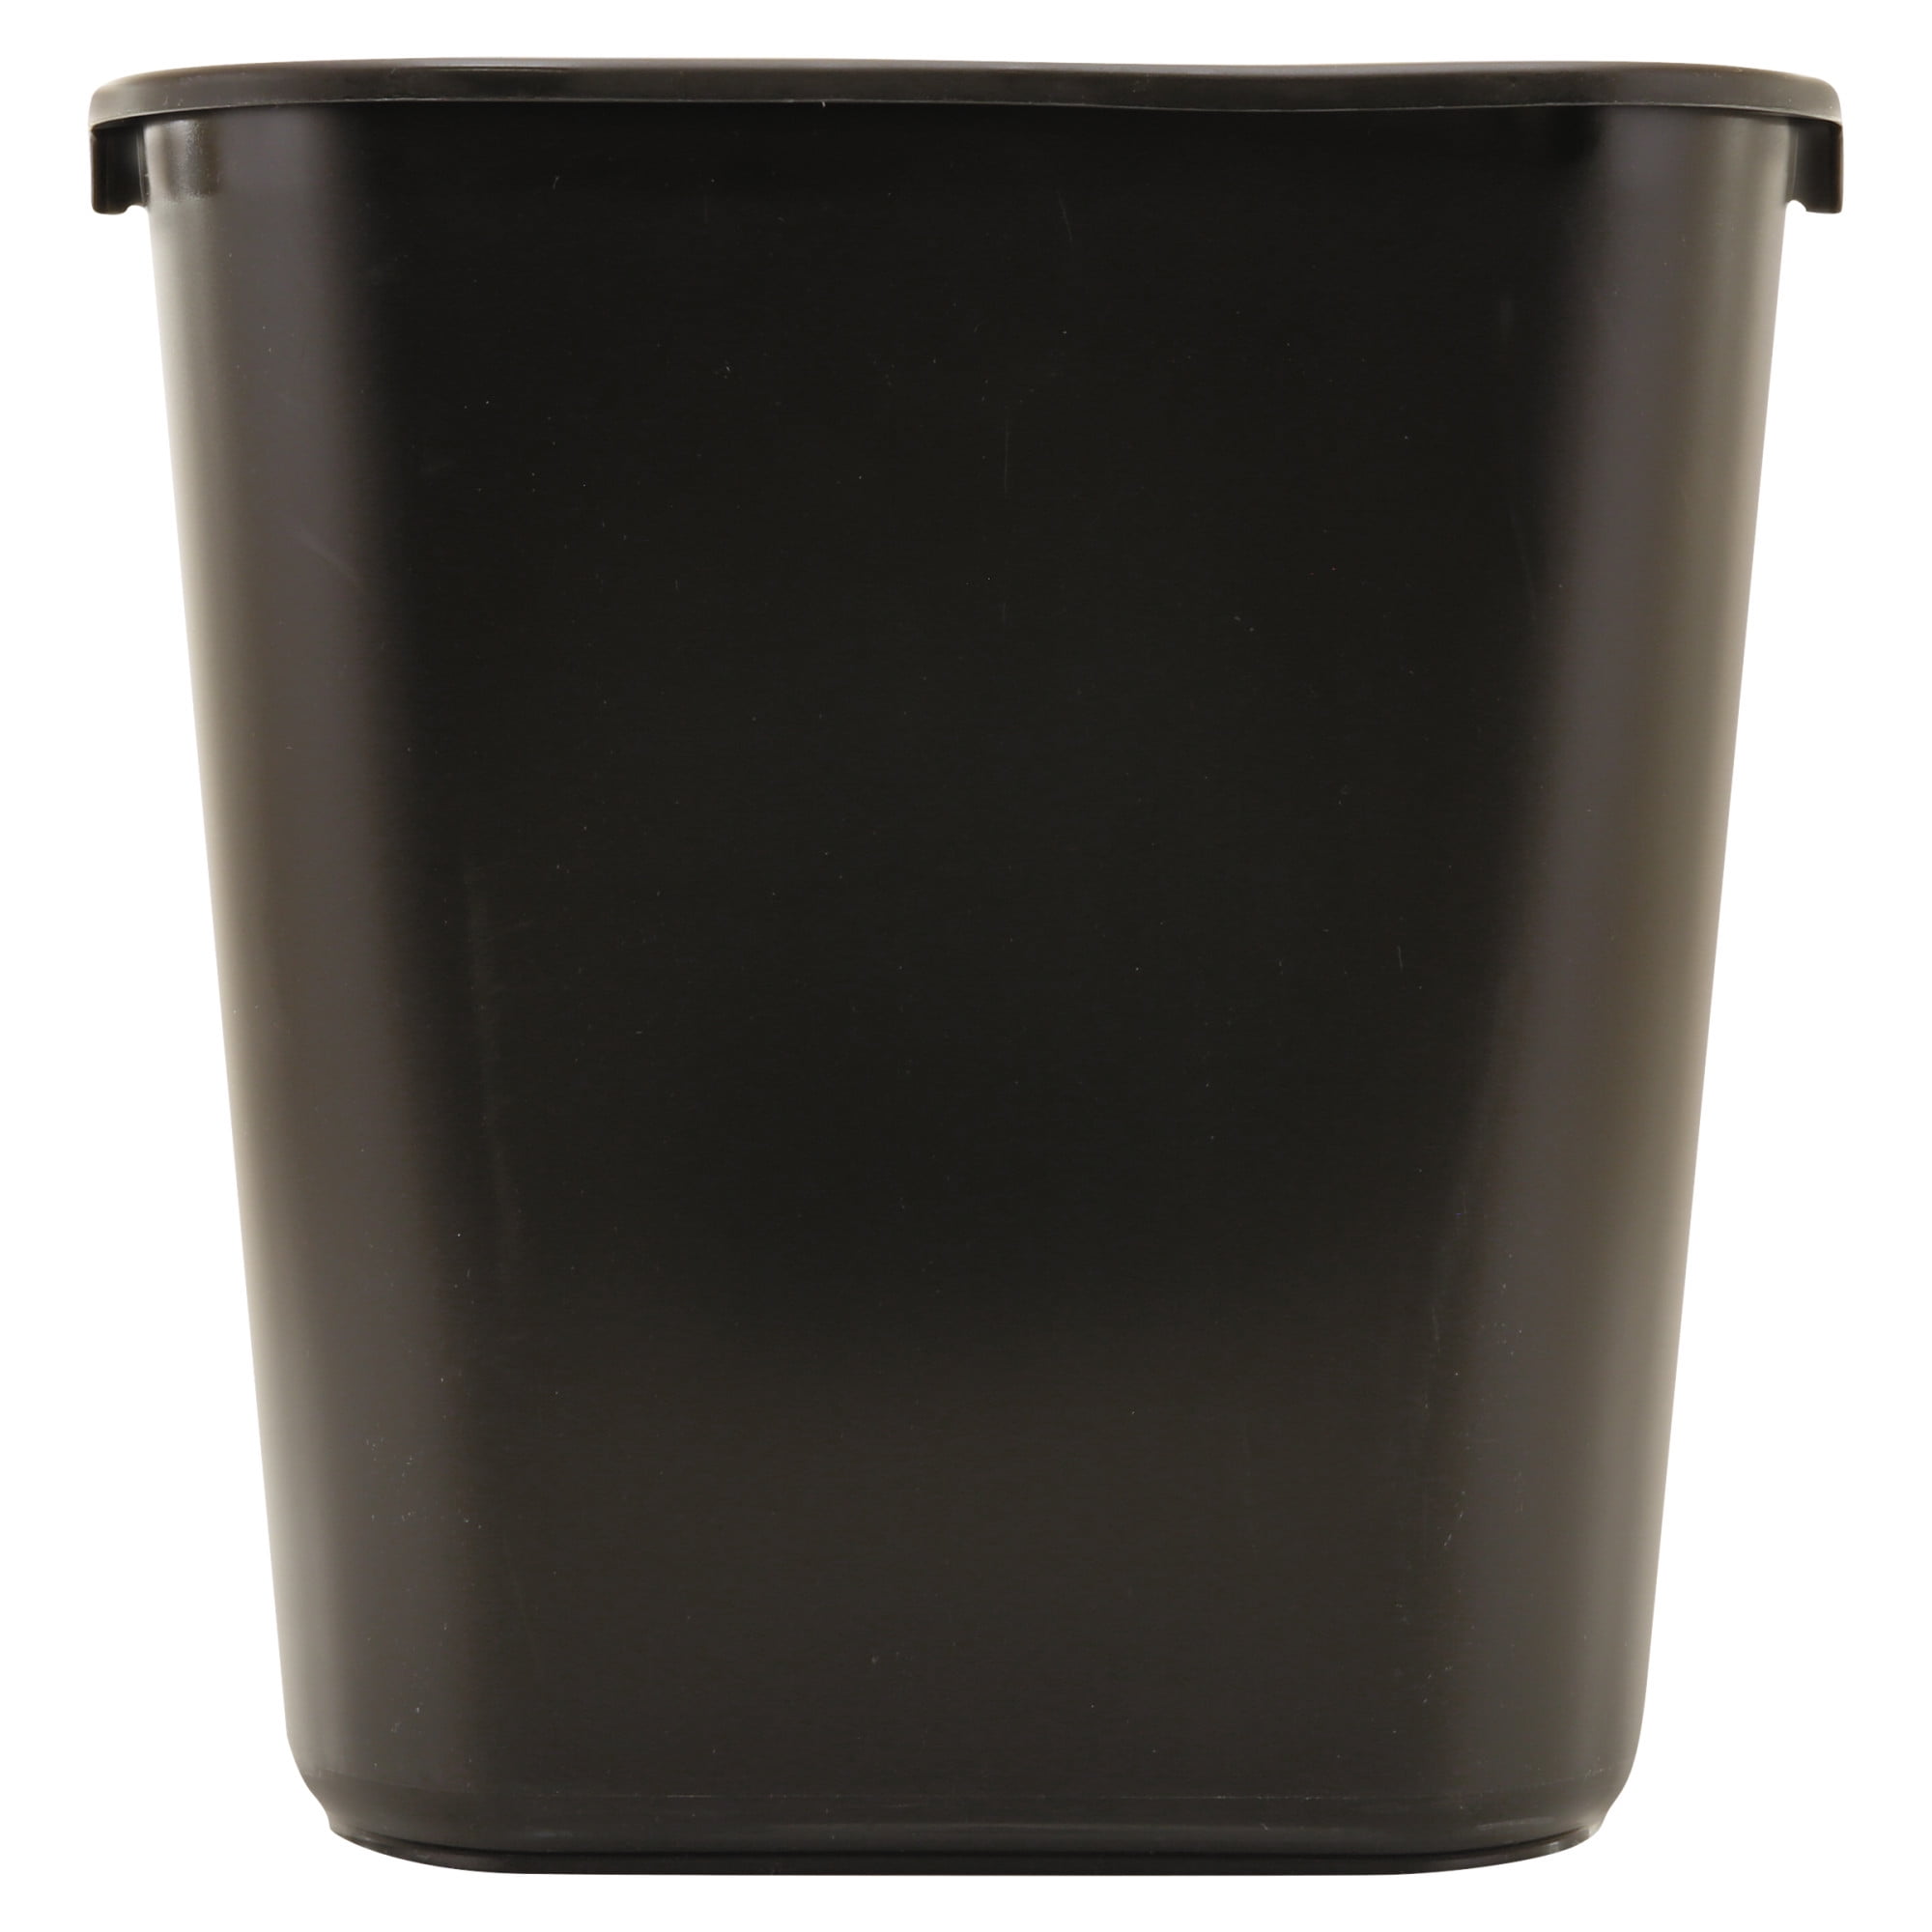 Black   4 units Four trash cans Plastic Trash Can Rubbermaid   Office 7 Gal 